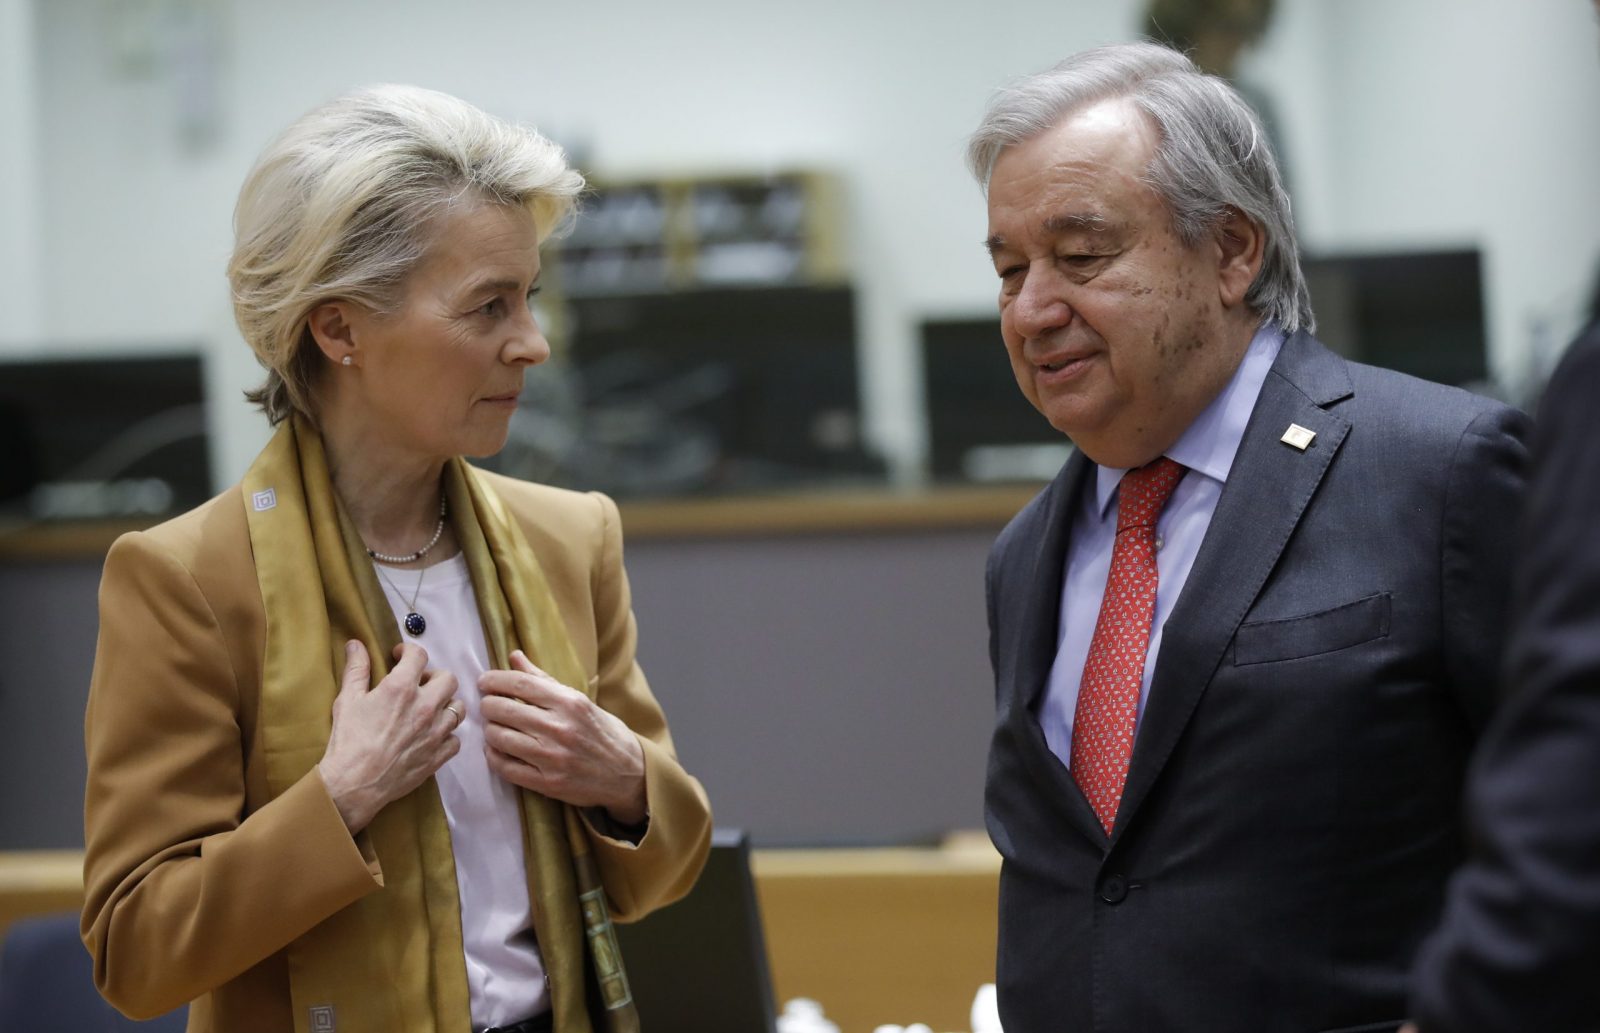 epa10538393 United Nations (UN) Secretary-General Antonio Guterres and European Commission President Ursula von der Leyen attend an EU Summit in Brussels, Belgium, 23 March 2023. EU leaders will meet for a two-day summit in Brussels to discuss the latest developments in relation to 'Russia's war of aggression against Ukraine' and continued EU support for Ukraine and its people. The leaders will also debate on competitiveness, single market and the economy, energy, external relations among other topics, including migration.  EPA/OLIVIER HOSLET